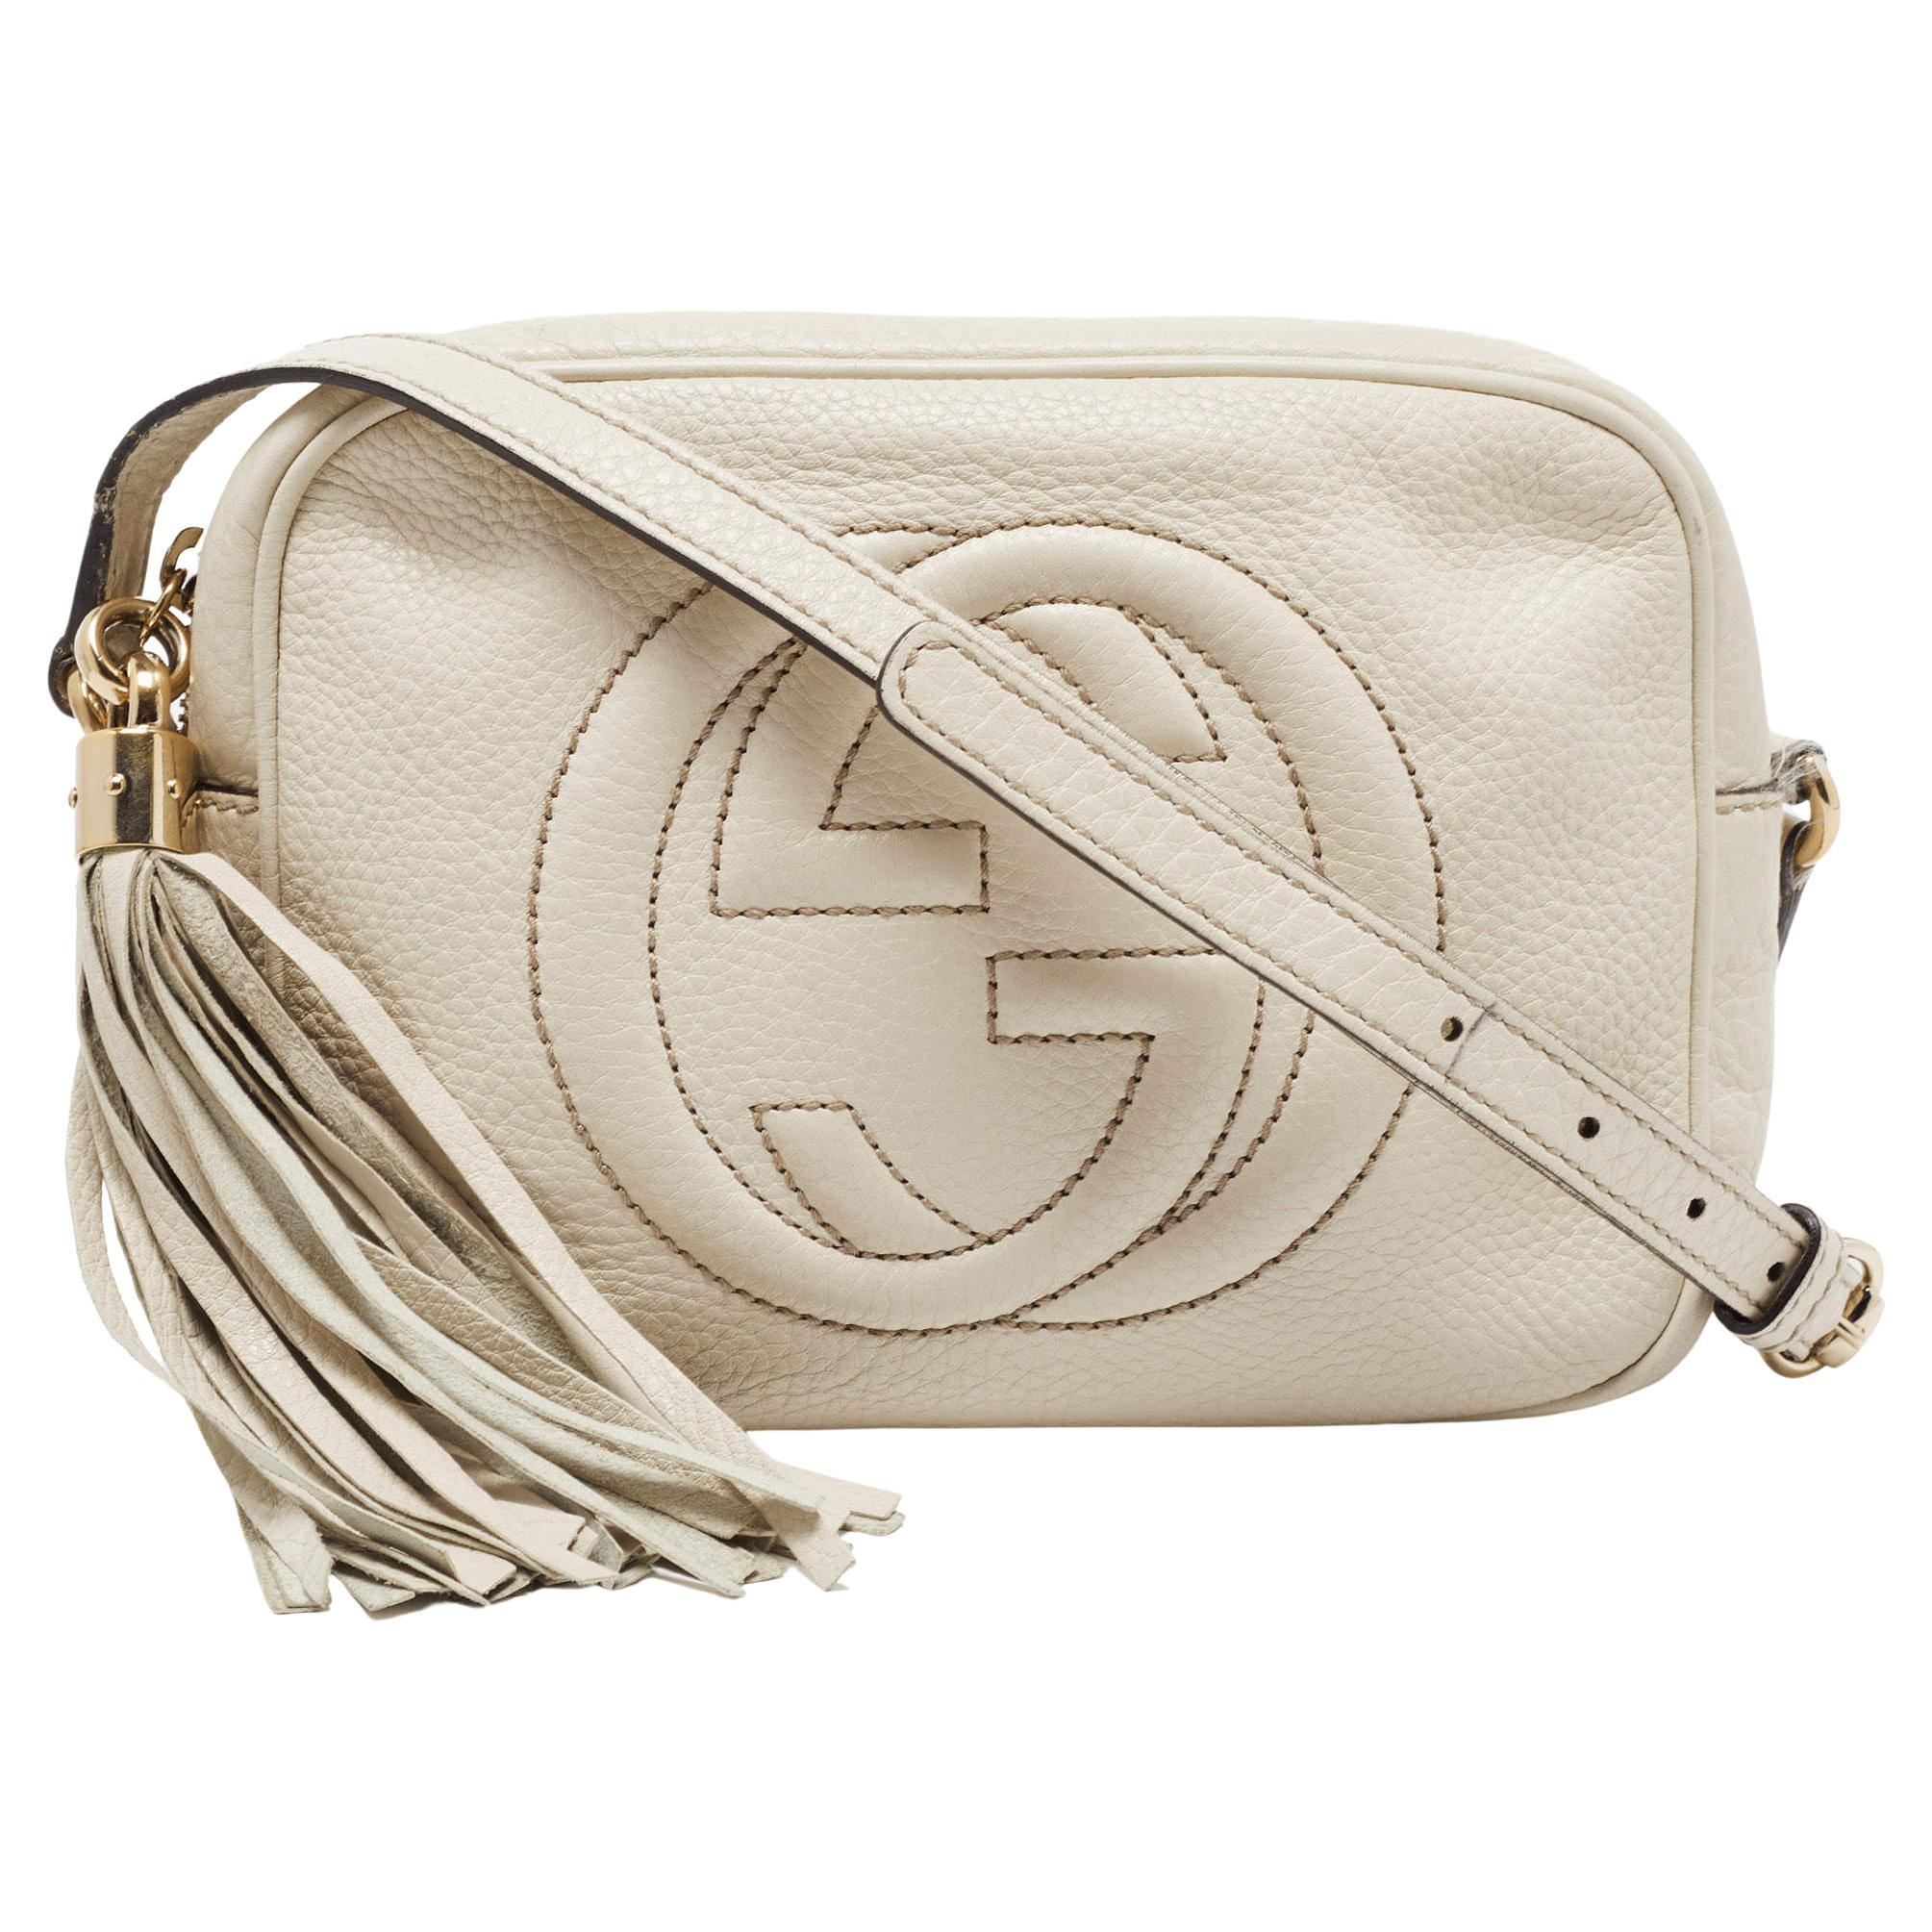 Gucci Off White Leather Small Soho Disco Shoulder Bag